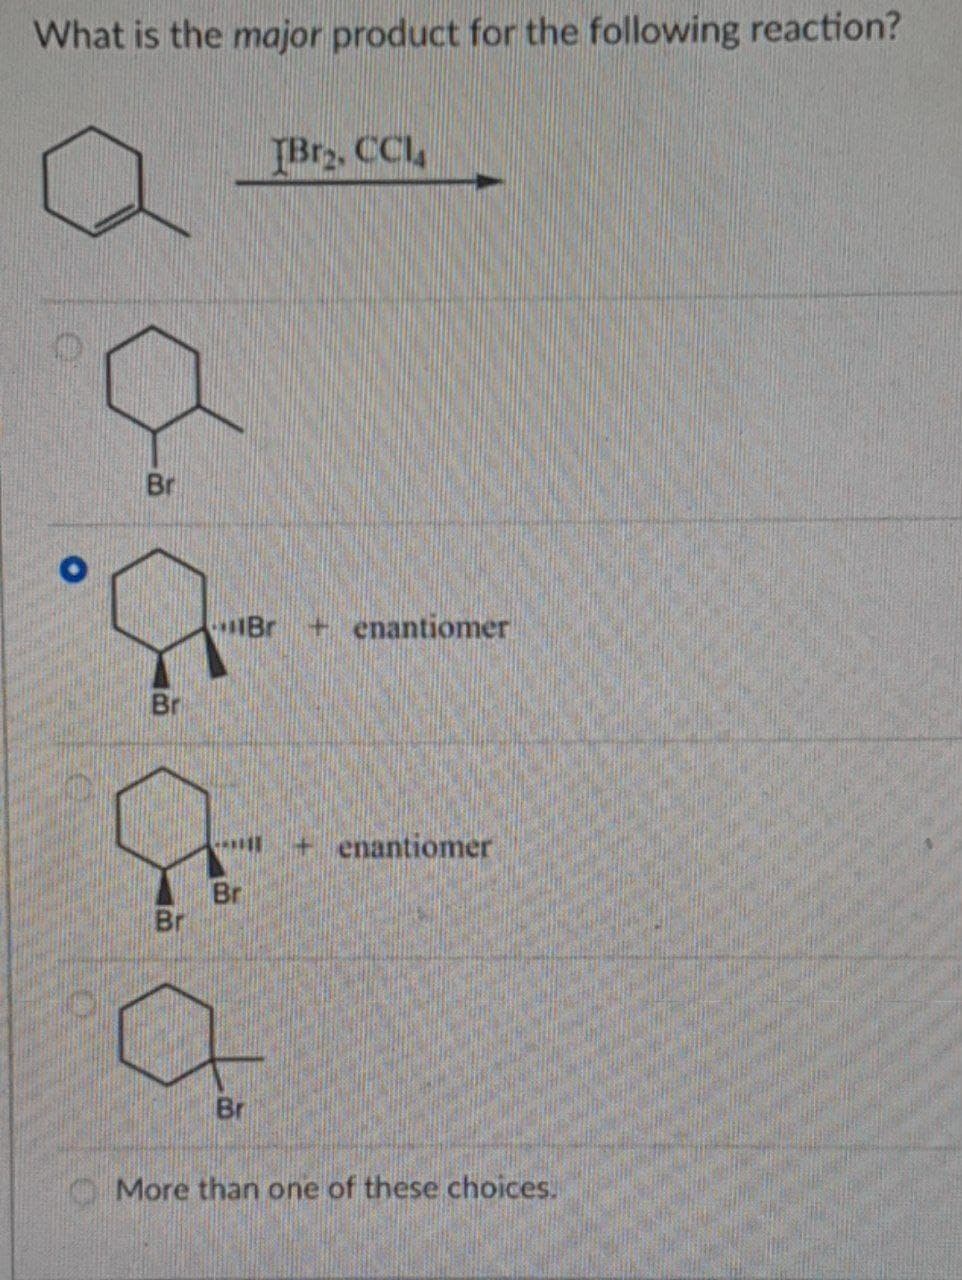 What is the major product for the following reaction?
TBr2. CCl4
O
Br
Br
St
Br
Brenantiomer
+ enantiomer
Br
Br
More than one of these choices.